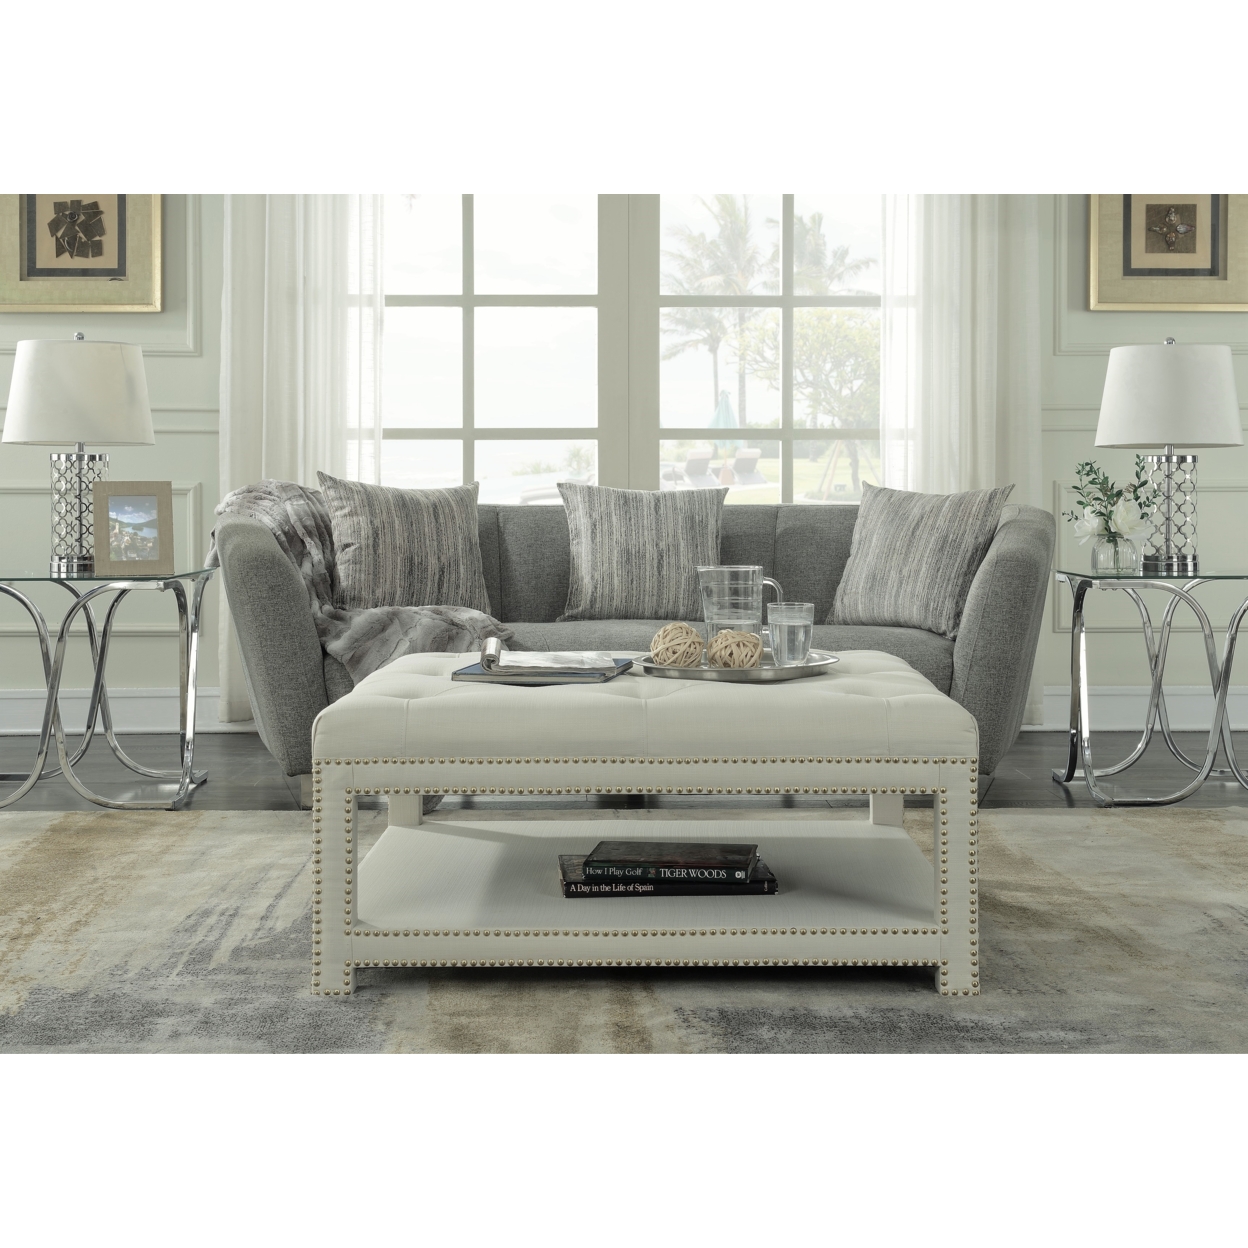 Quinn Coffee Table Ottoman 2-Layer Polished Nailhead Tufted Linen Bench - Beige